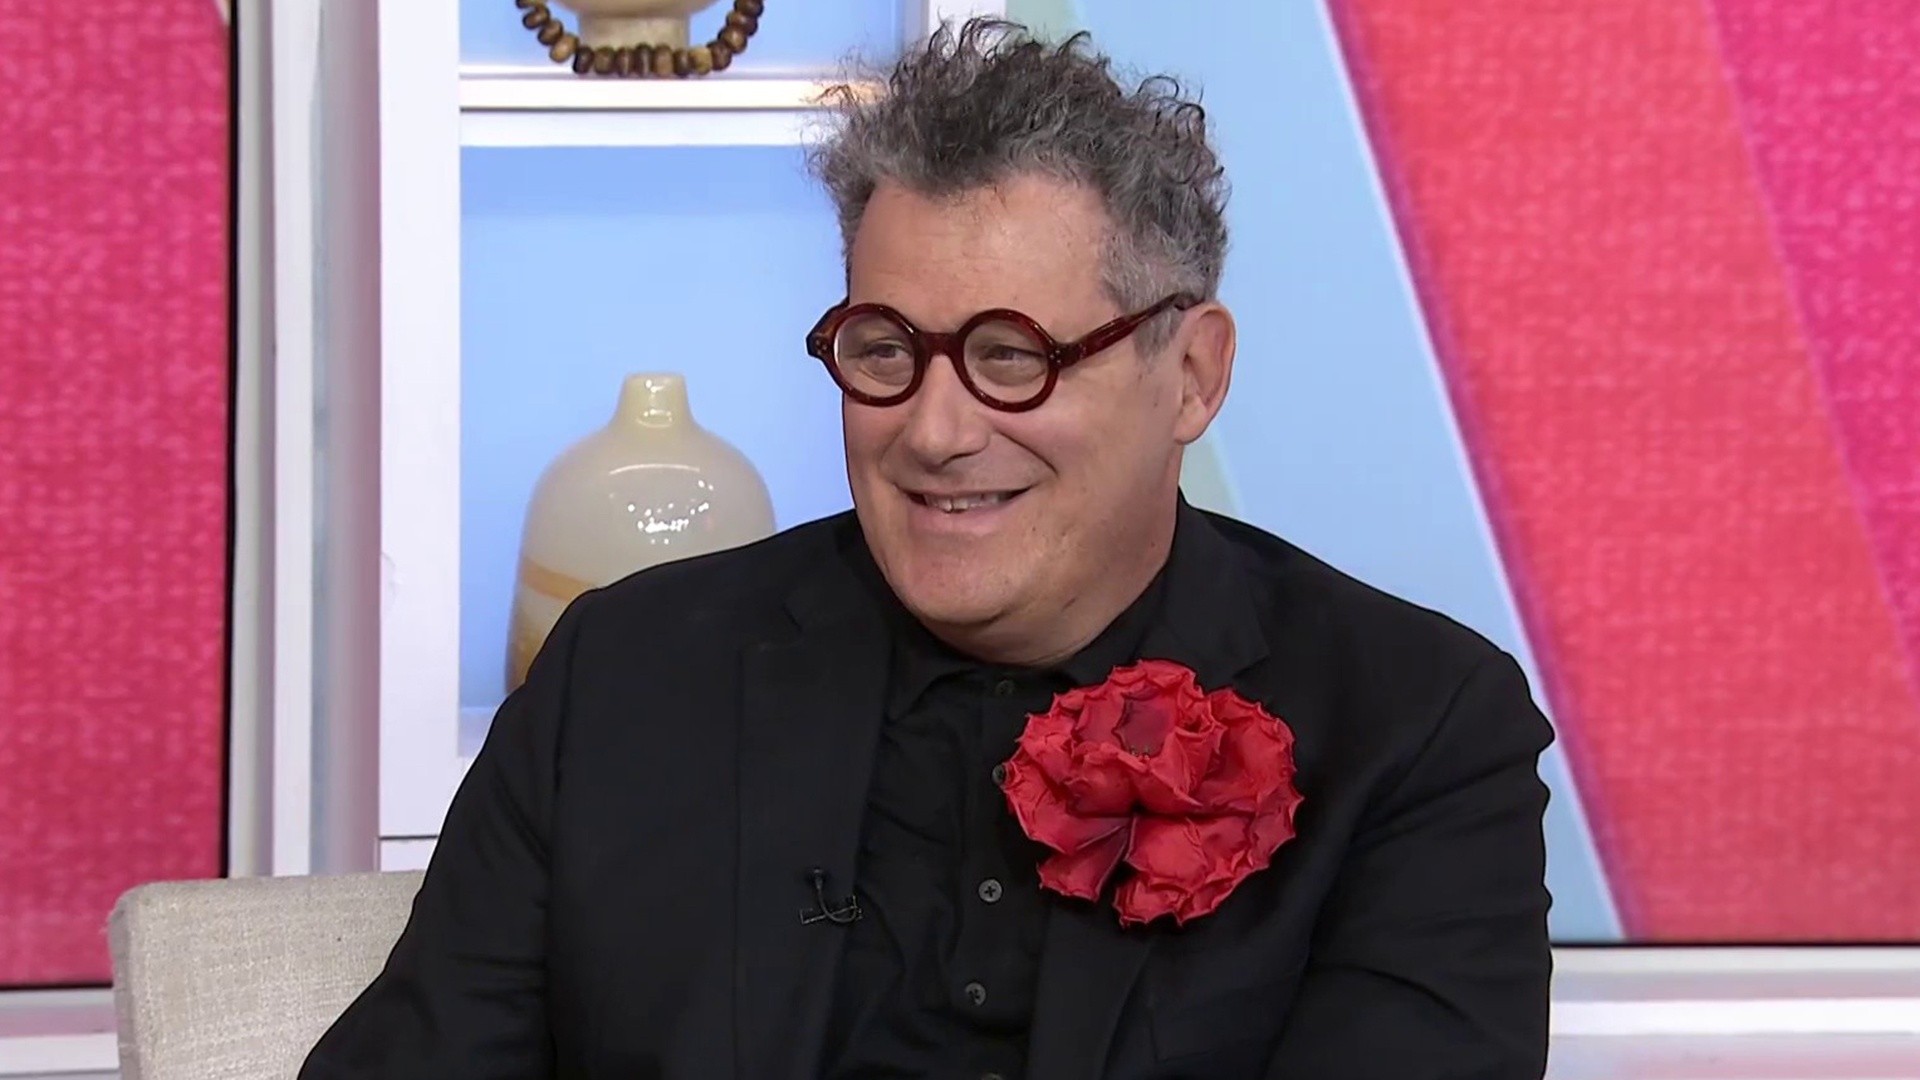 Why Isaac Mizrahi's Cabaret Act Is the Hottest Ticket at New York